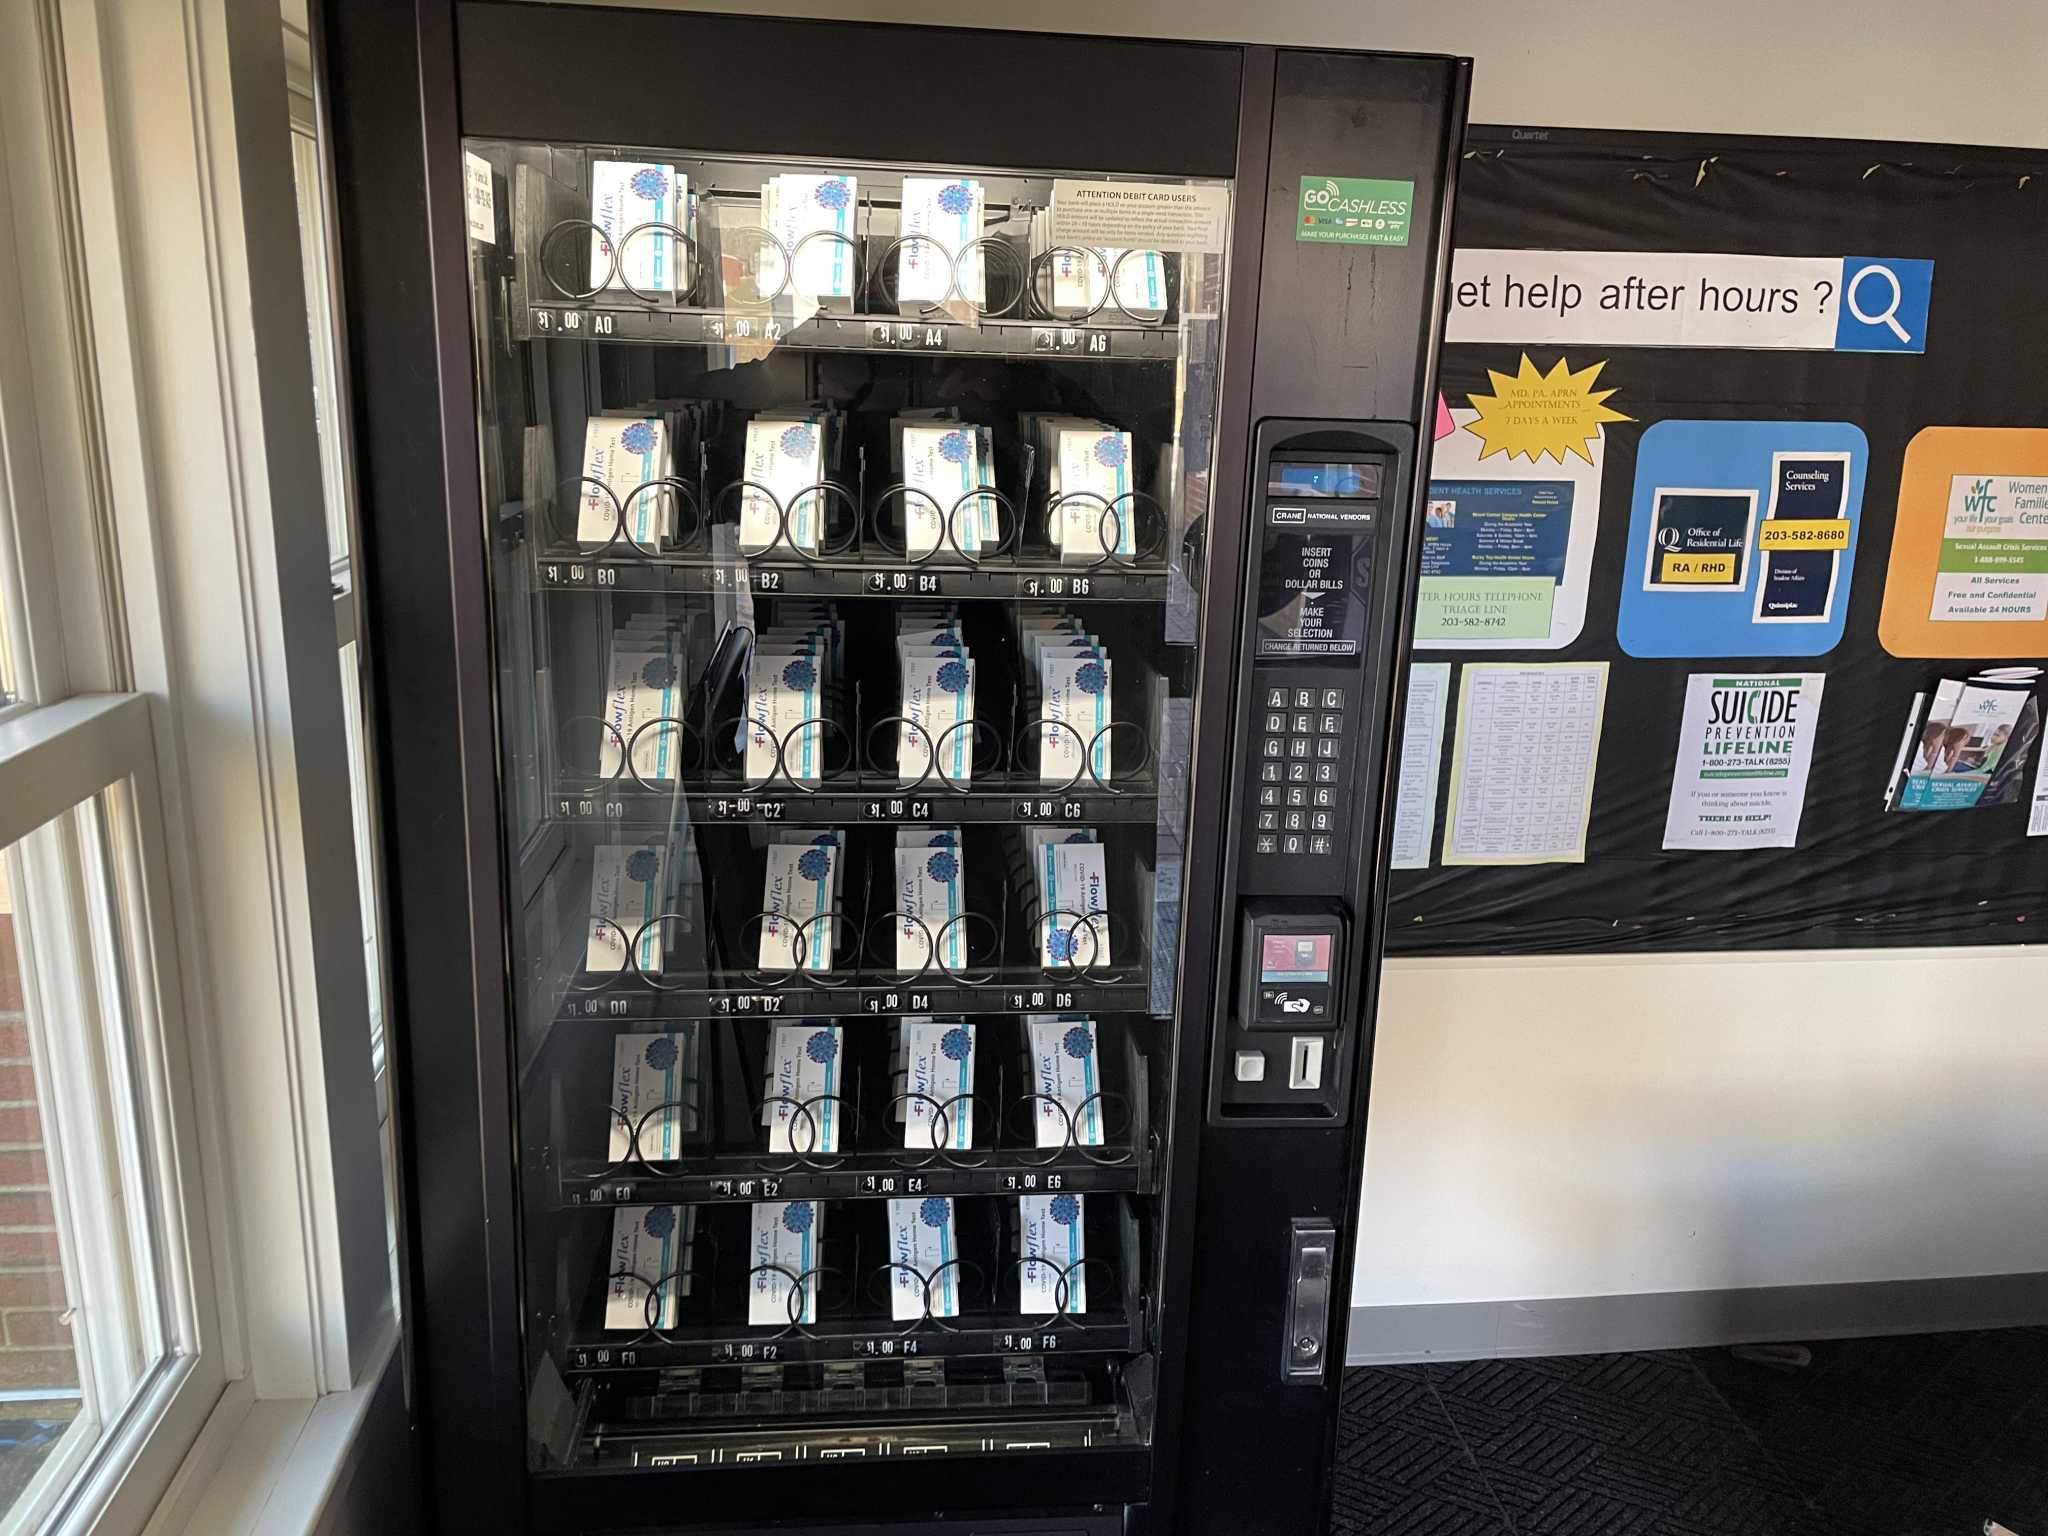 First Technology Vending Machine On Campus Brings New Level Of Convenience  To Students - Texas A&M Today